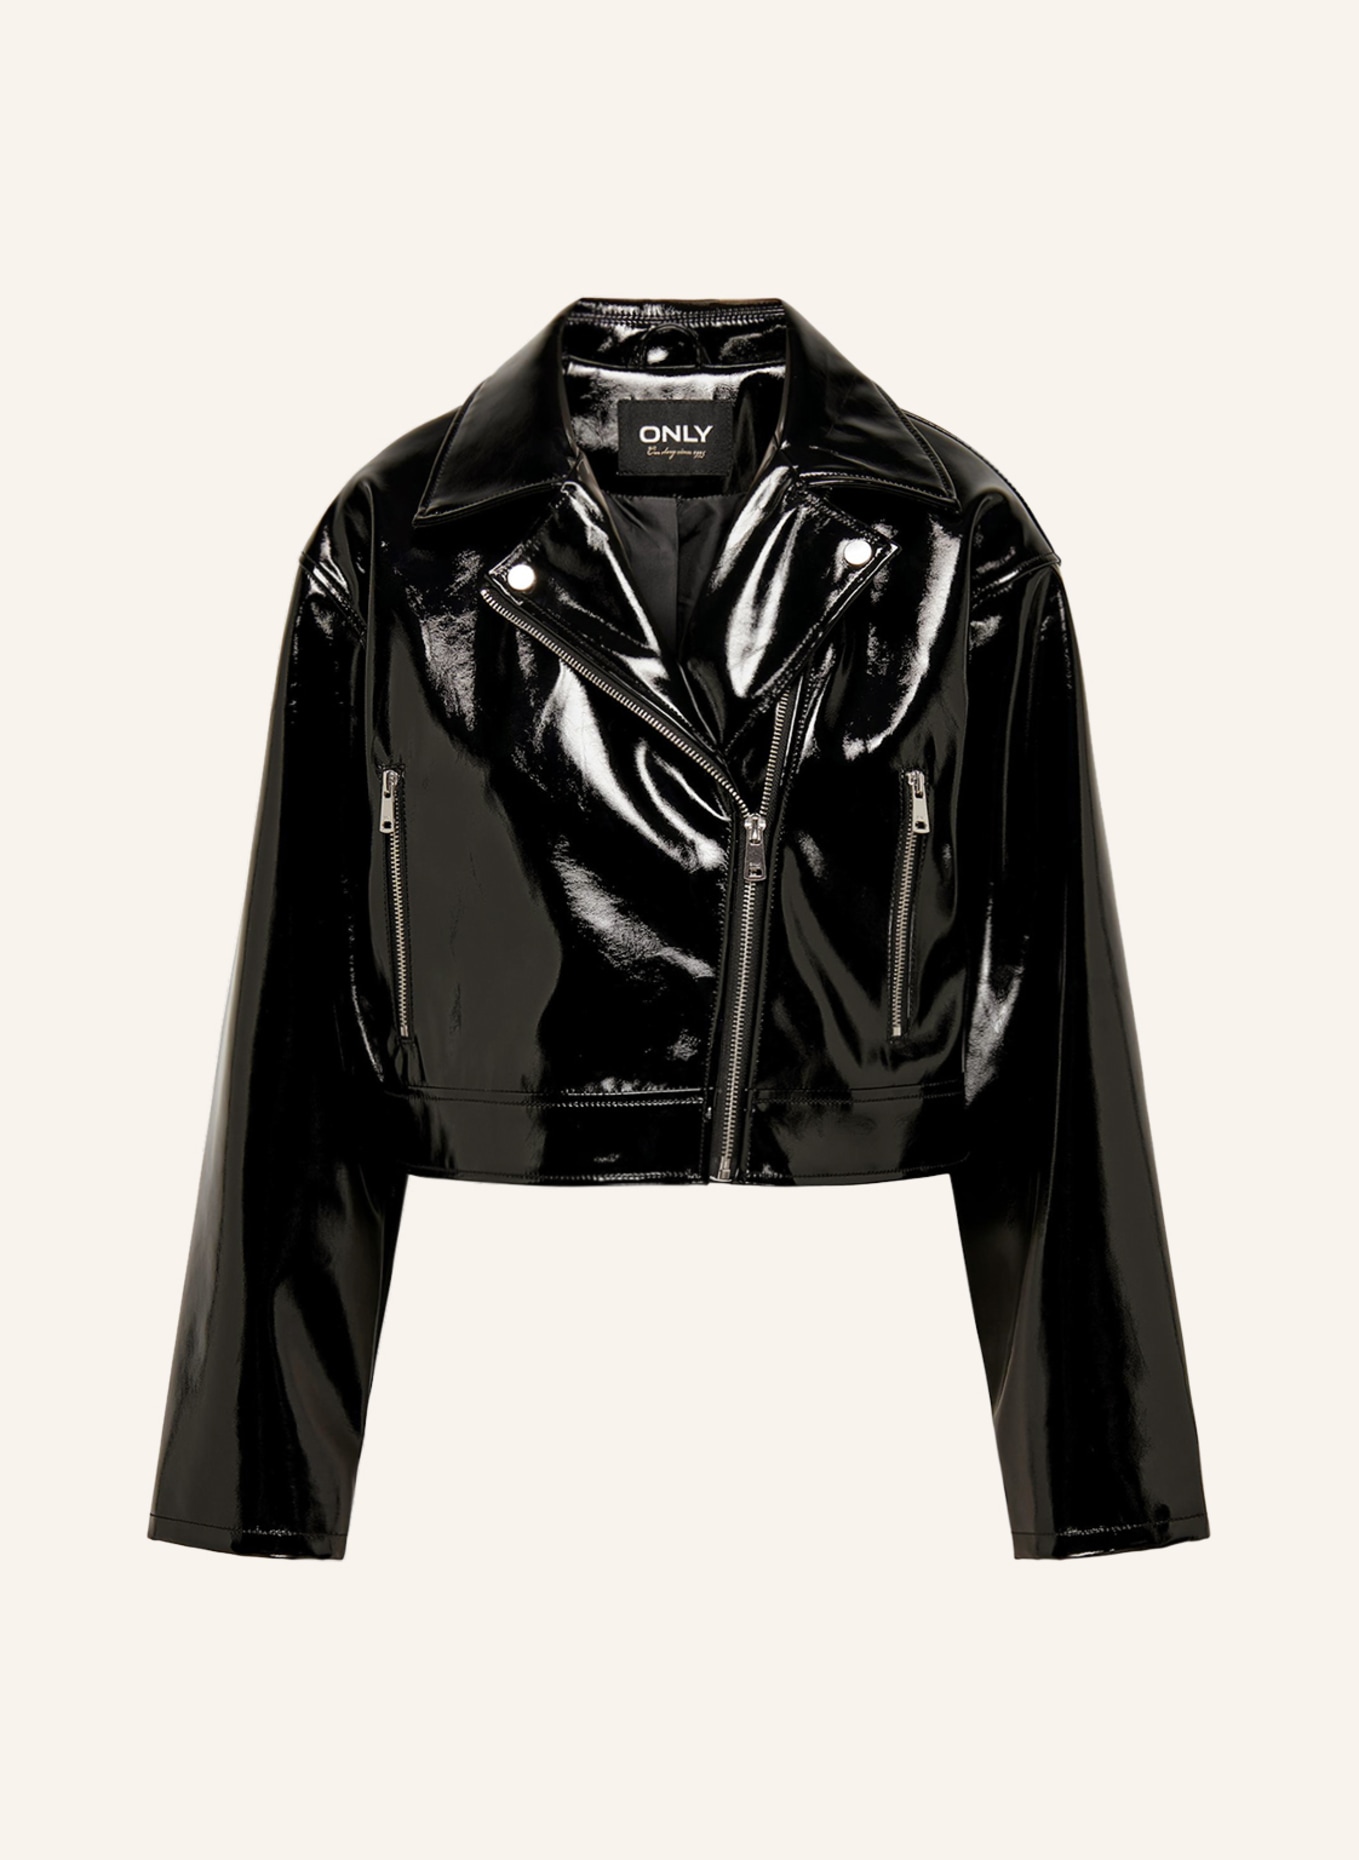 ONLY Jacket in leather look, Color: BLACK (Image 1)